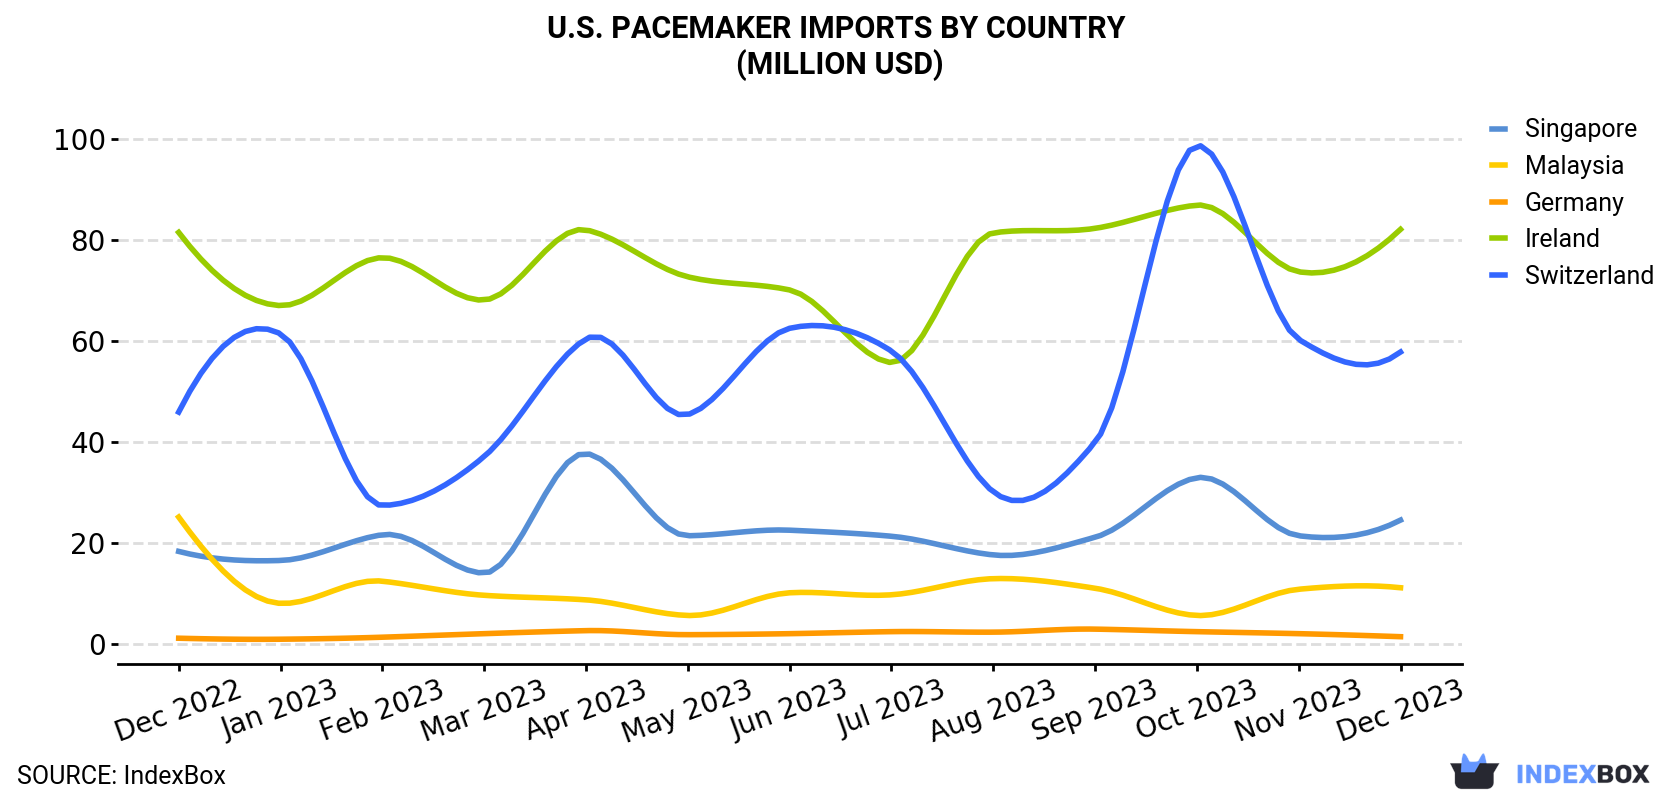 U.S. Pacemaker Imports By Country (Million USD)